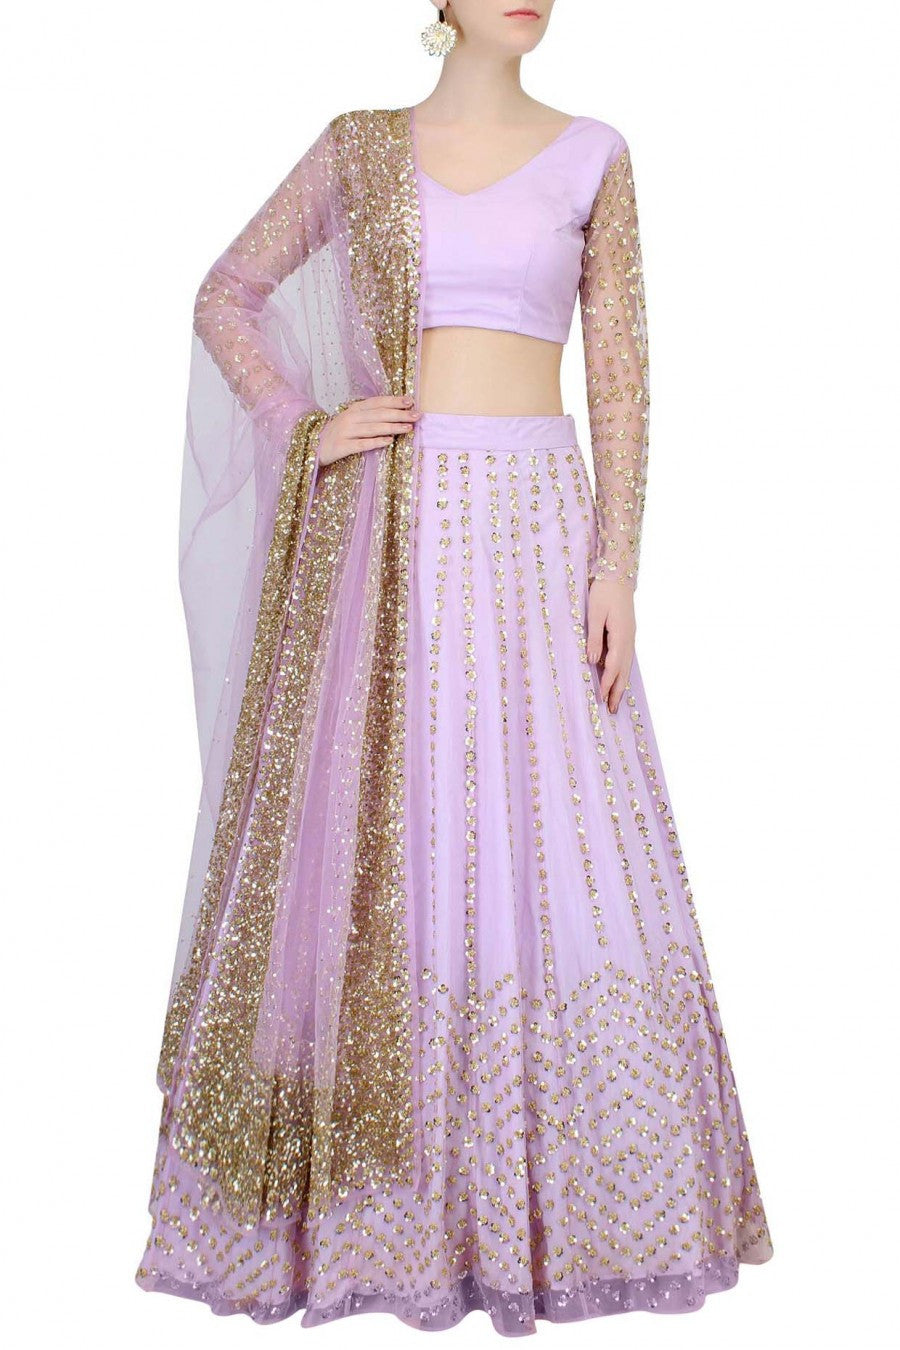 Lavender lehenga with Golden sequin embroidery